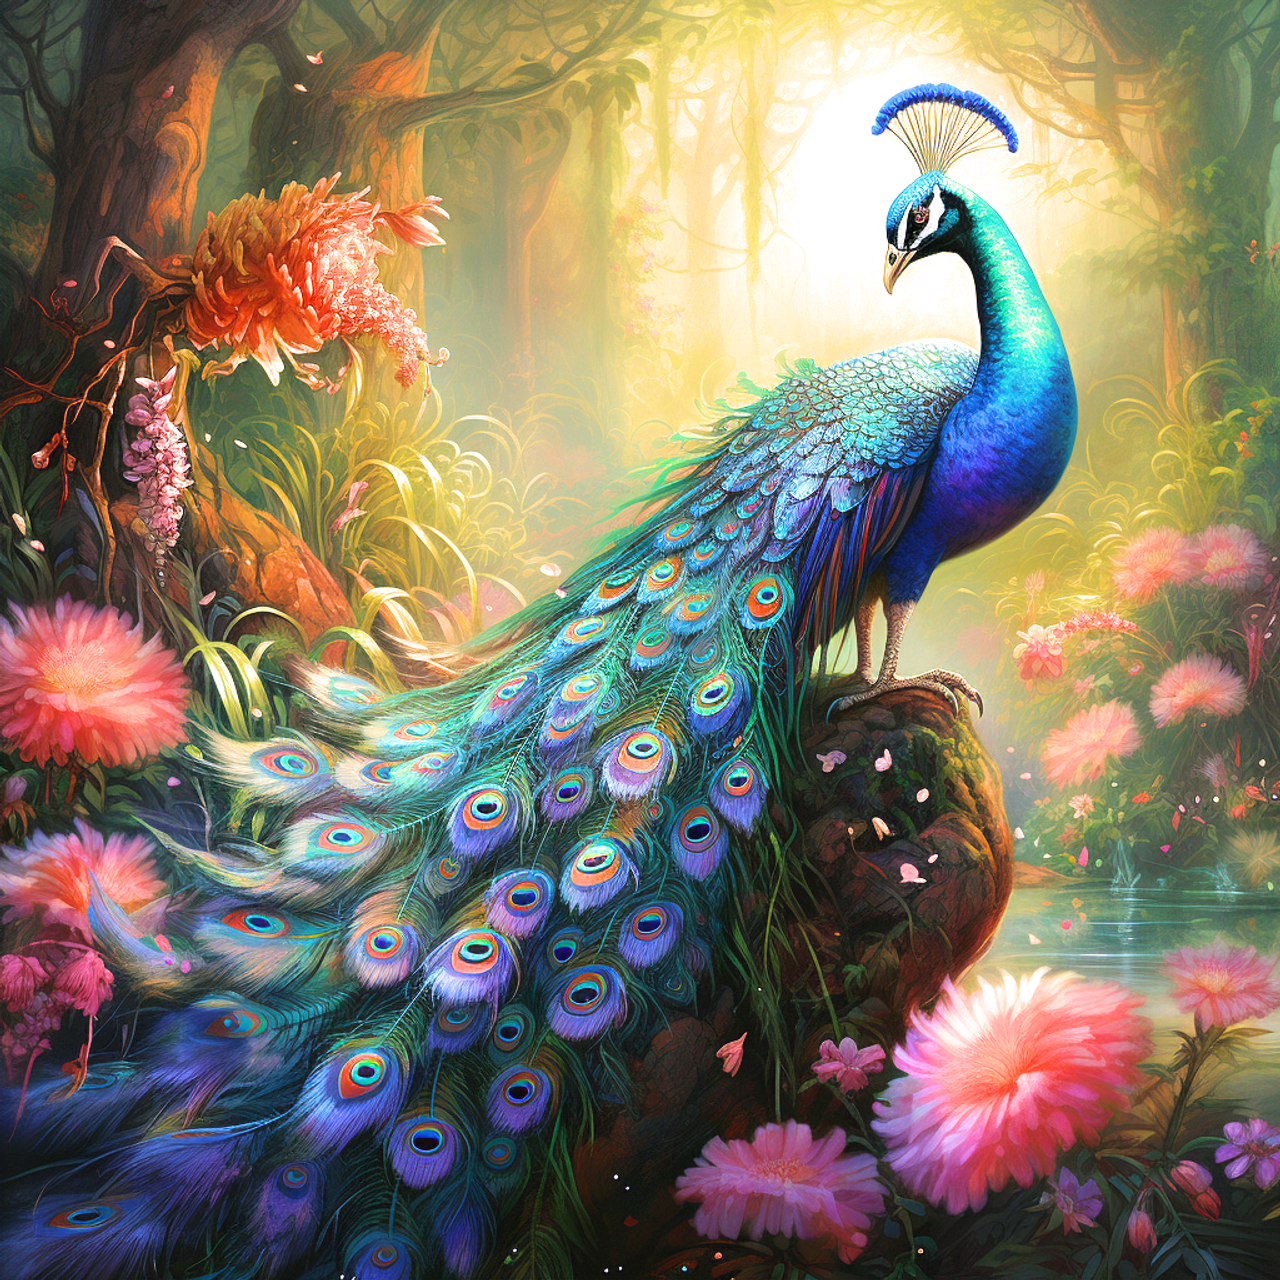 Fractal Peacock - 5D Diamond Painting - DIY 5D Painting with